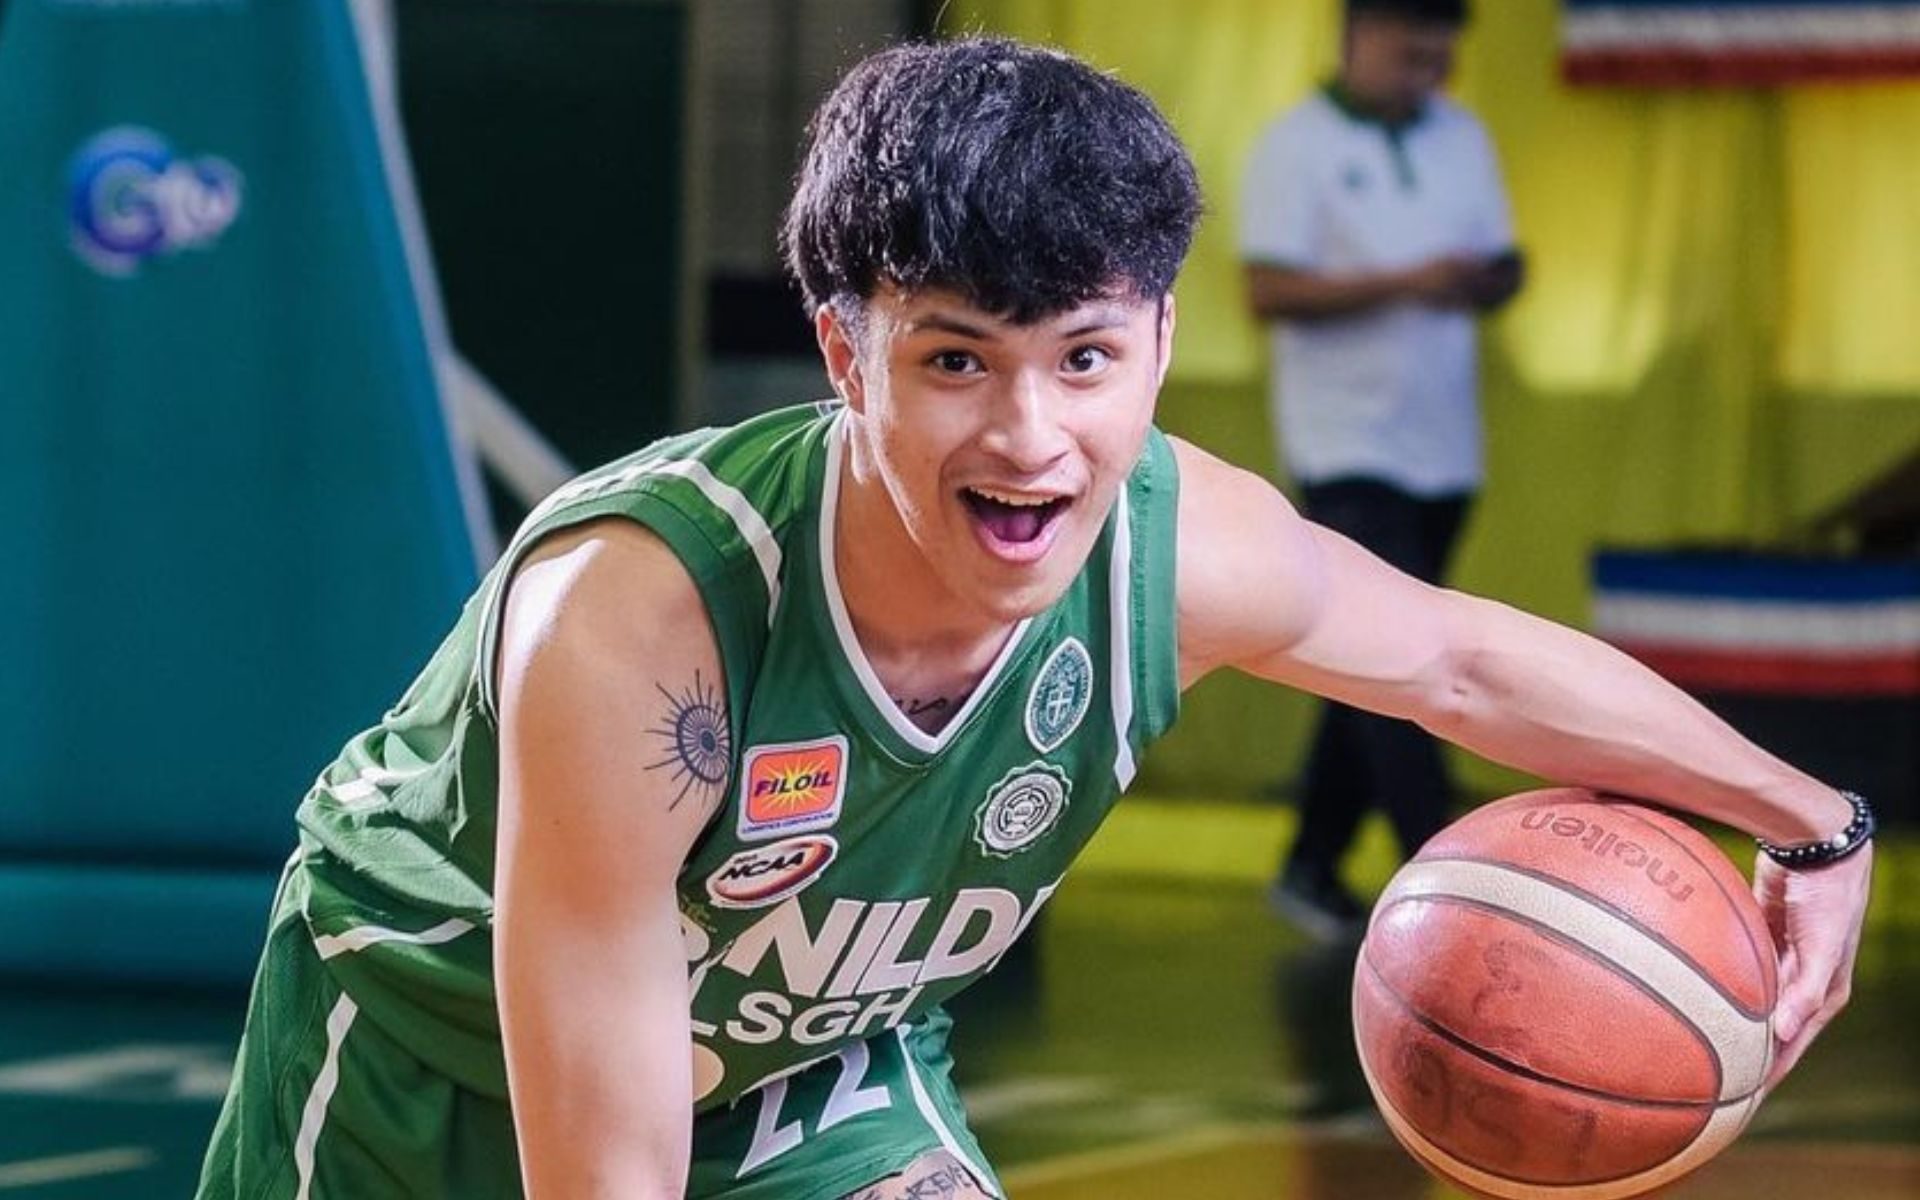 Lsgh Standout Ethan Alian Commits To Uaaps Green Archers